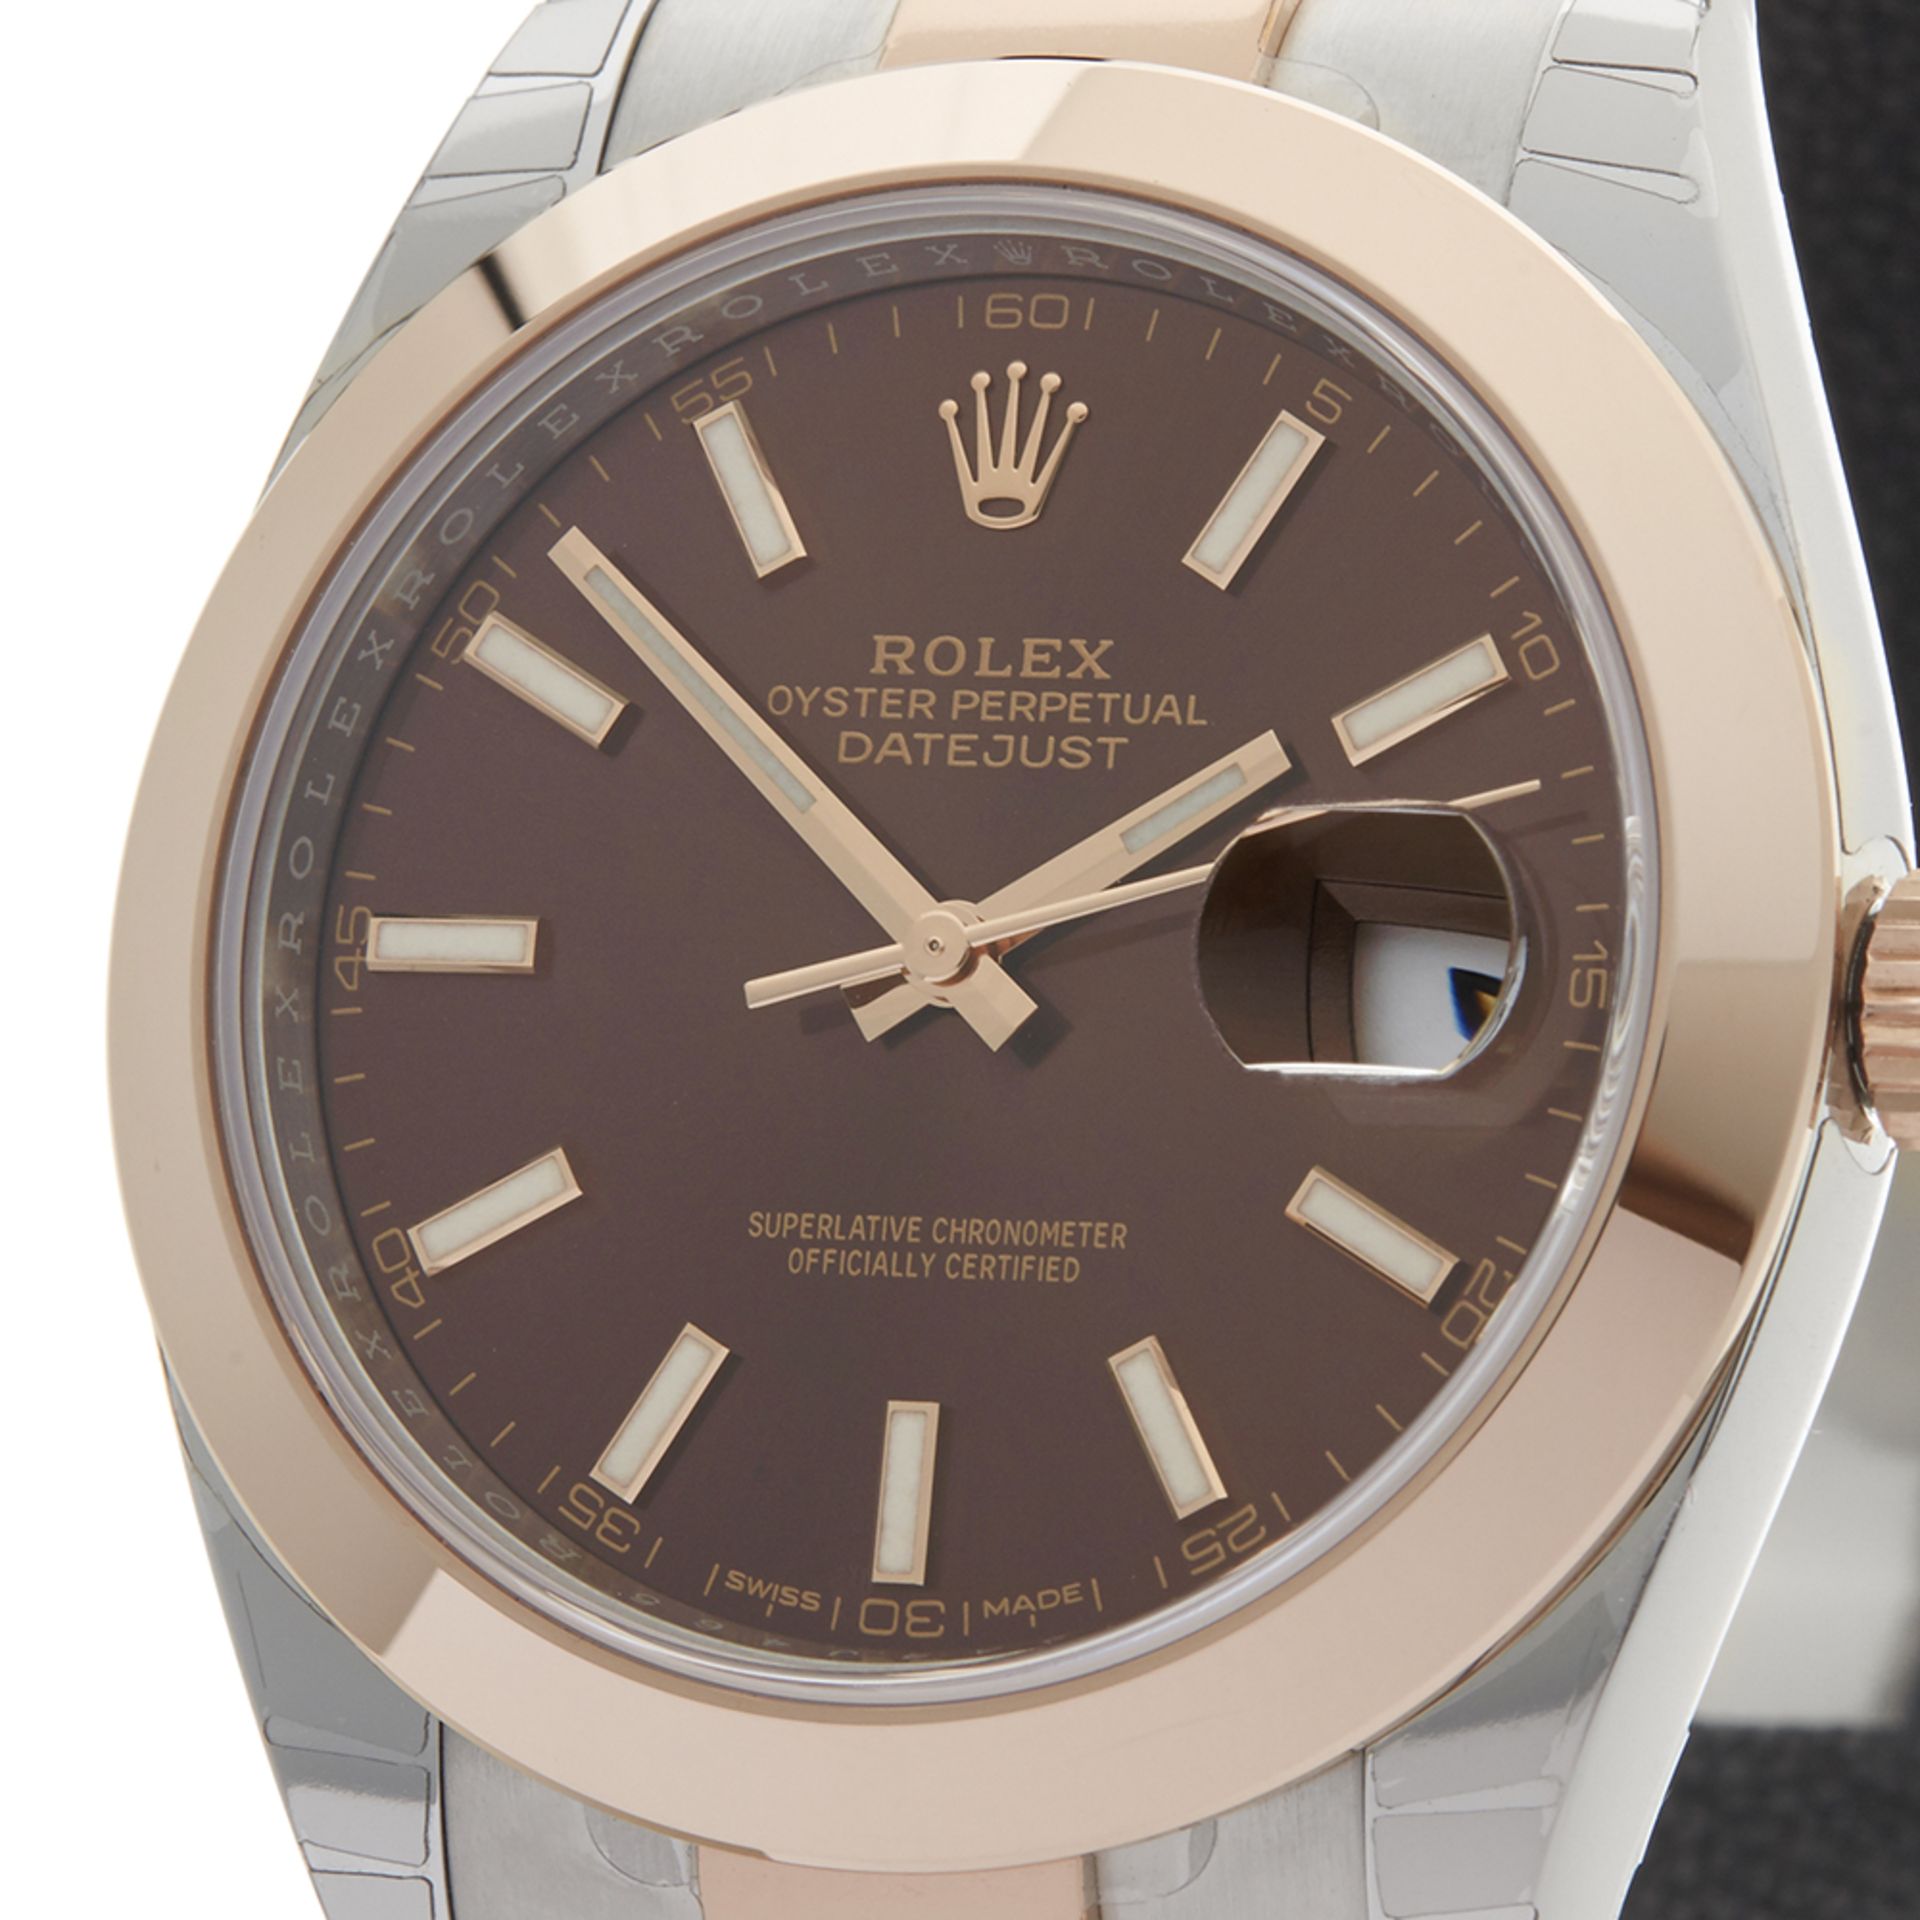 Datejust 41mm Stainless Steel & 18k Rose Gold - 126301 - Image 3 of 9